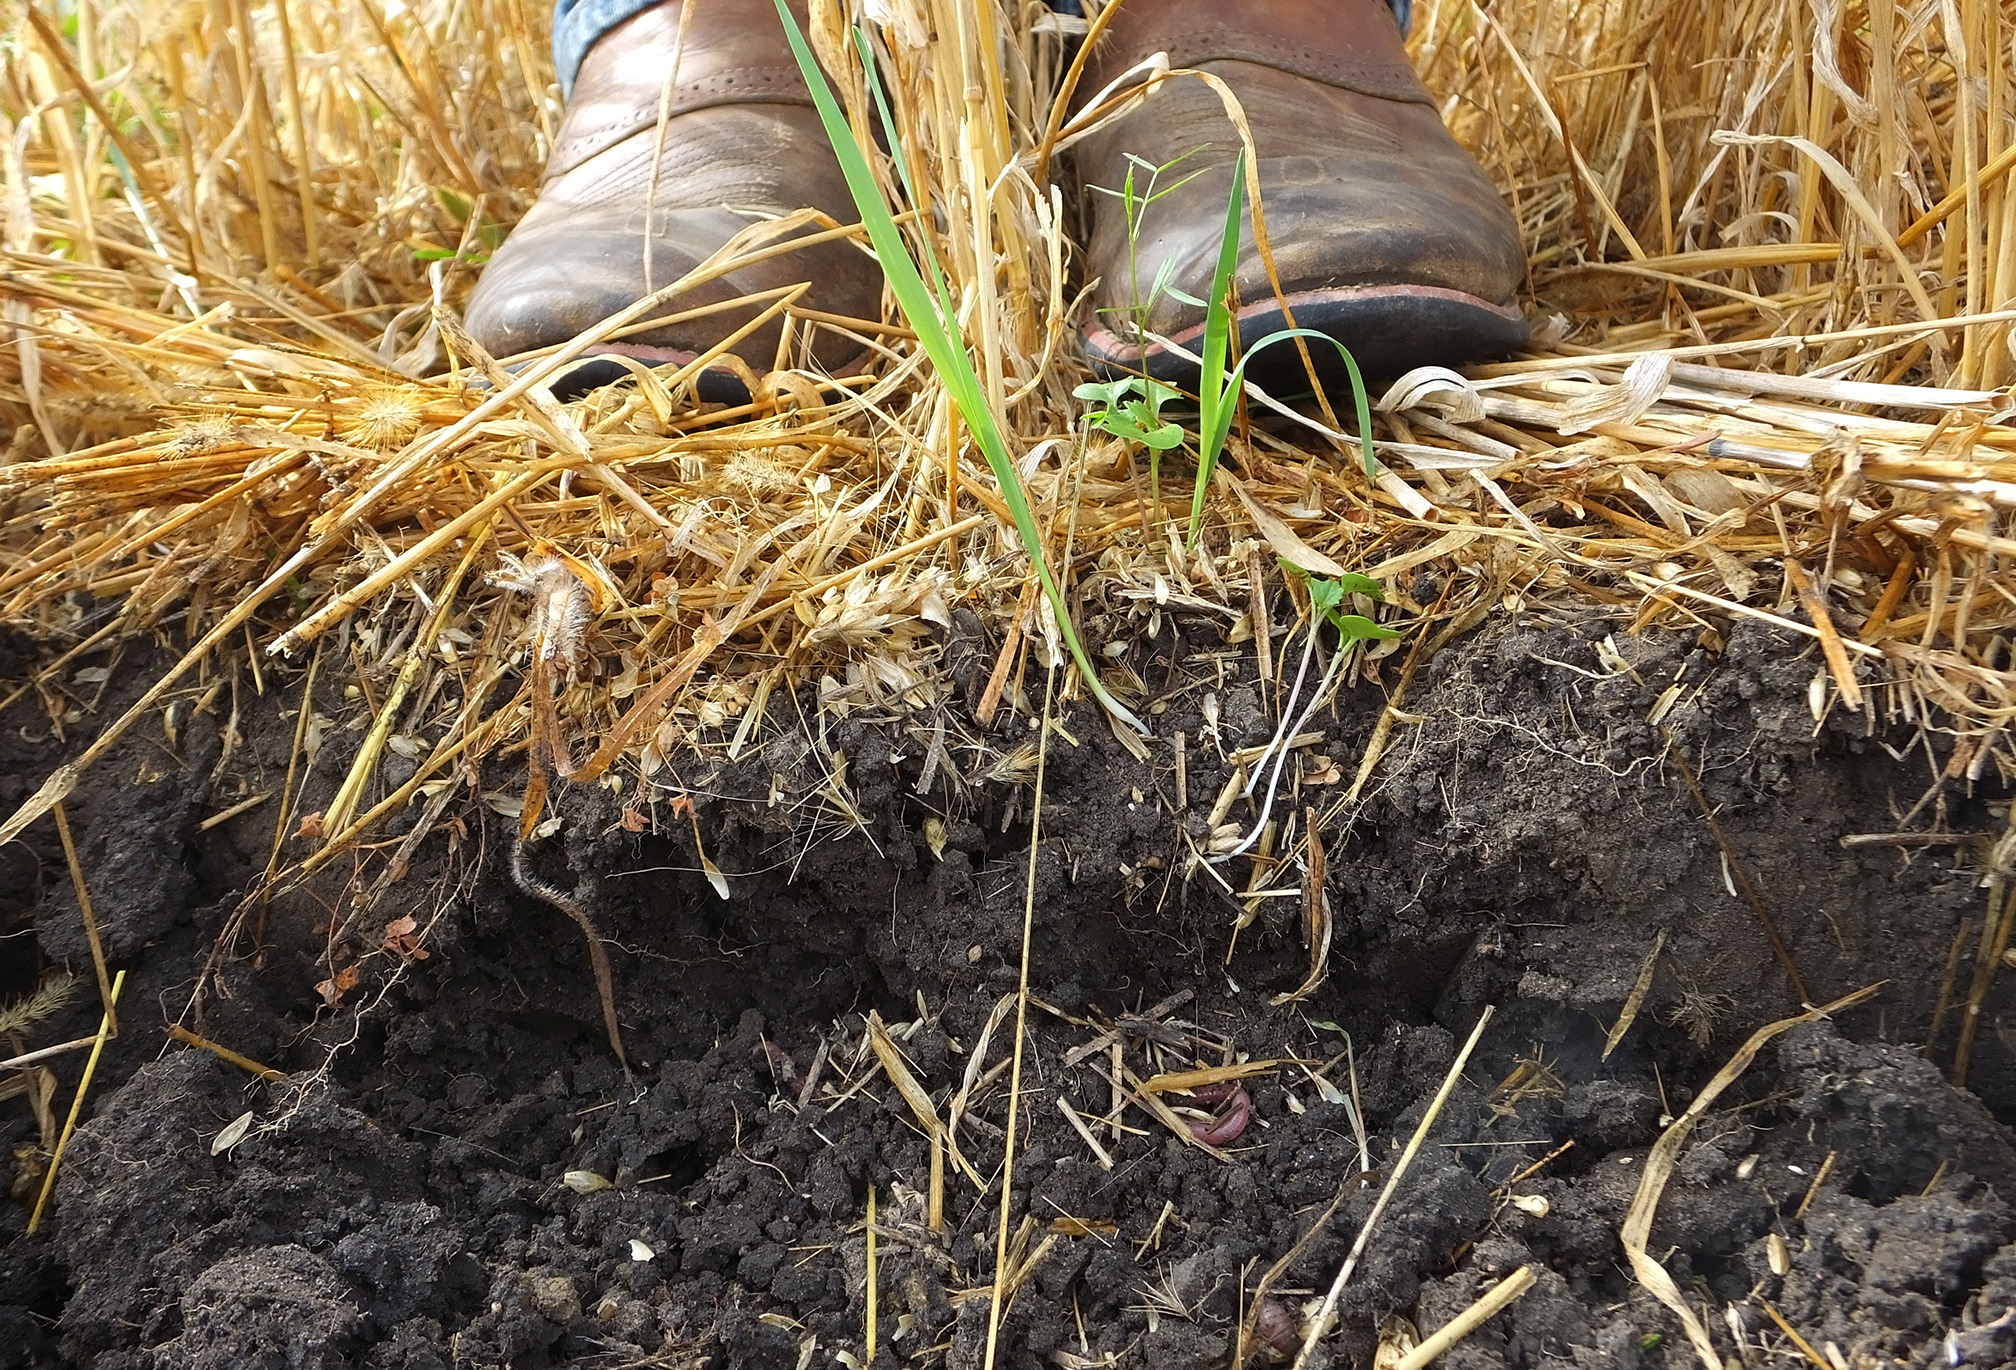 A photo that shows a cross section of soil on the side of a pit. The soil is dark brown and crumbling into lumps. The upper part of the photo shows the pale brown straw of the crop growing in the field, and the scuffed brown boots of a farmer.